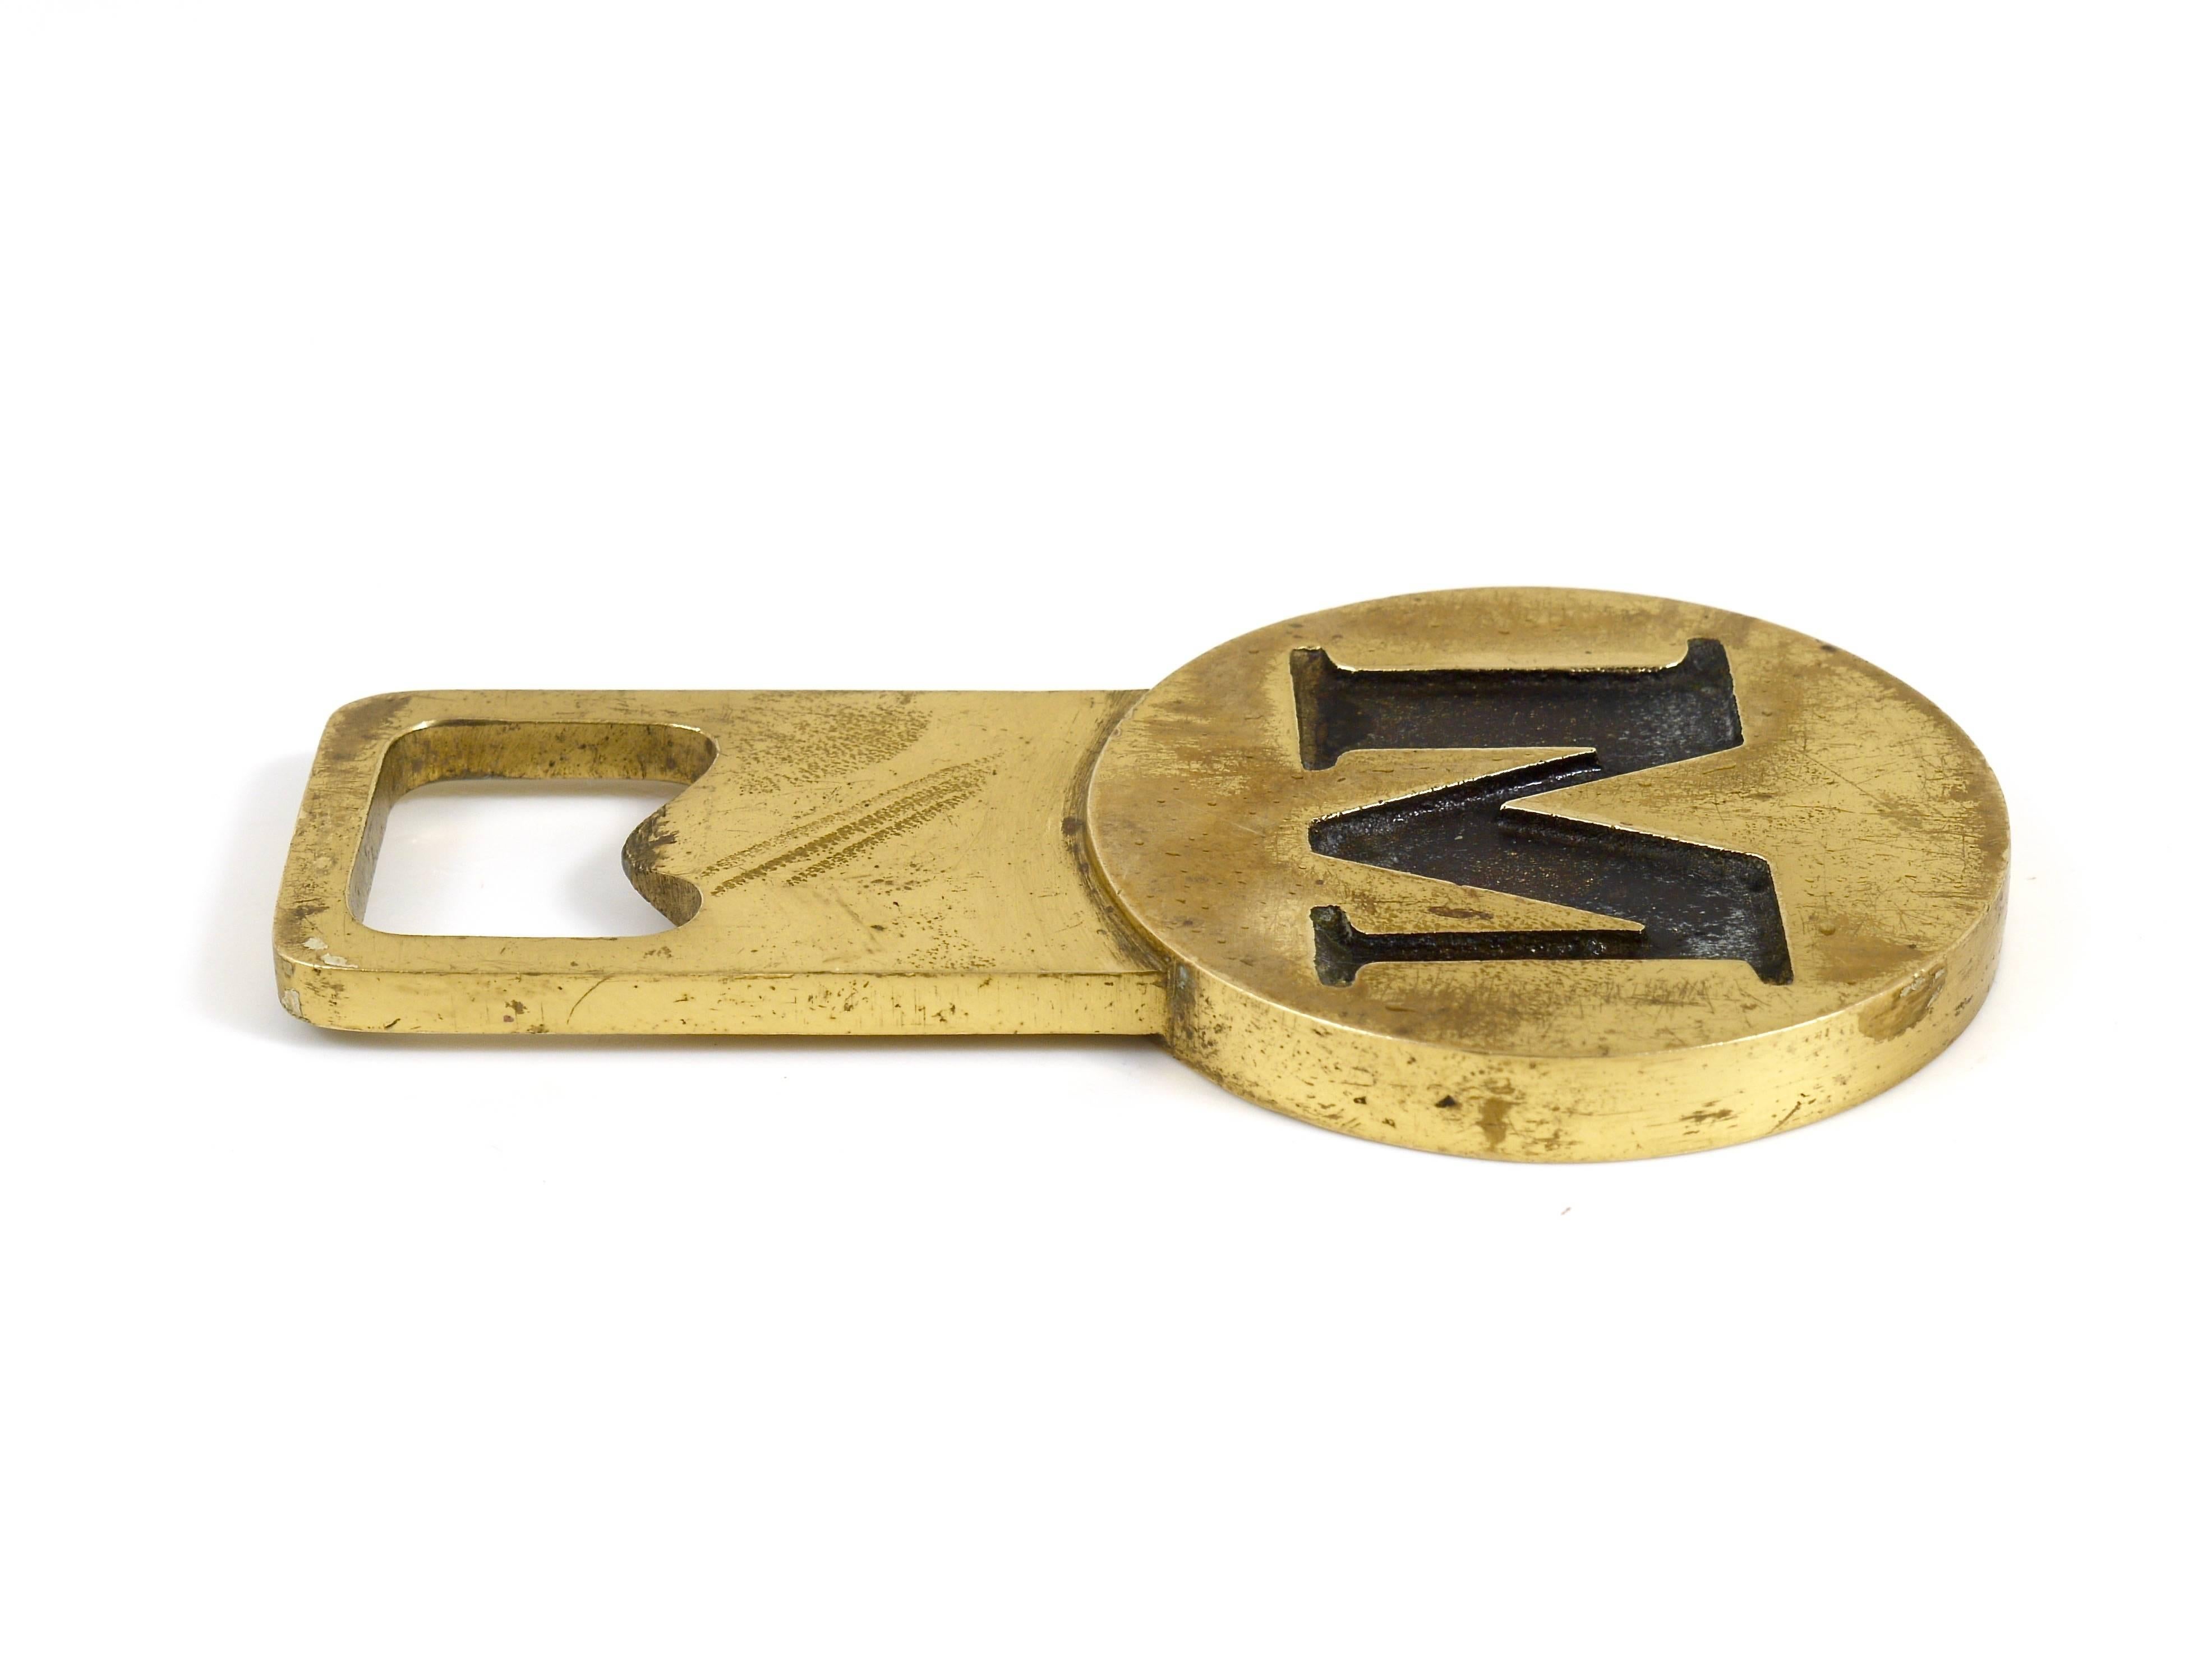 A beautiful modernist bottle opener, displaying the letter 